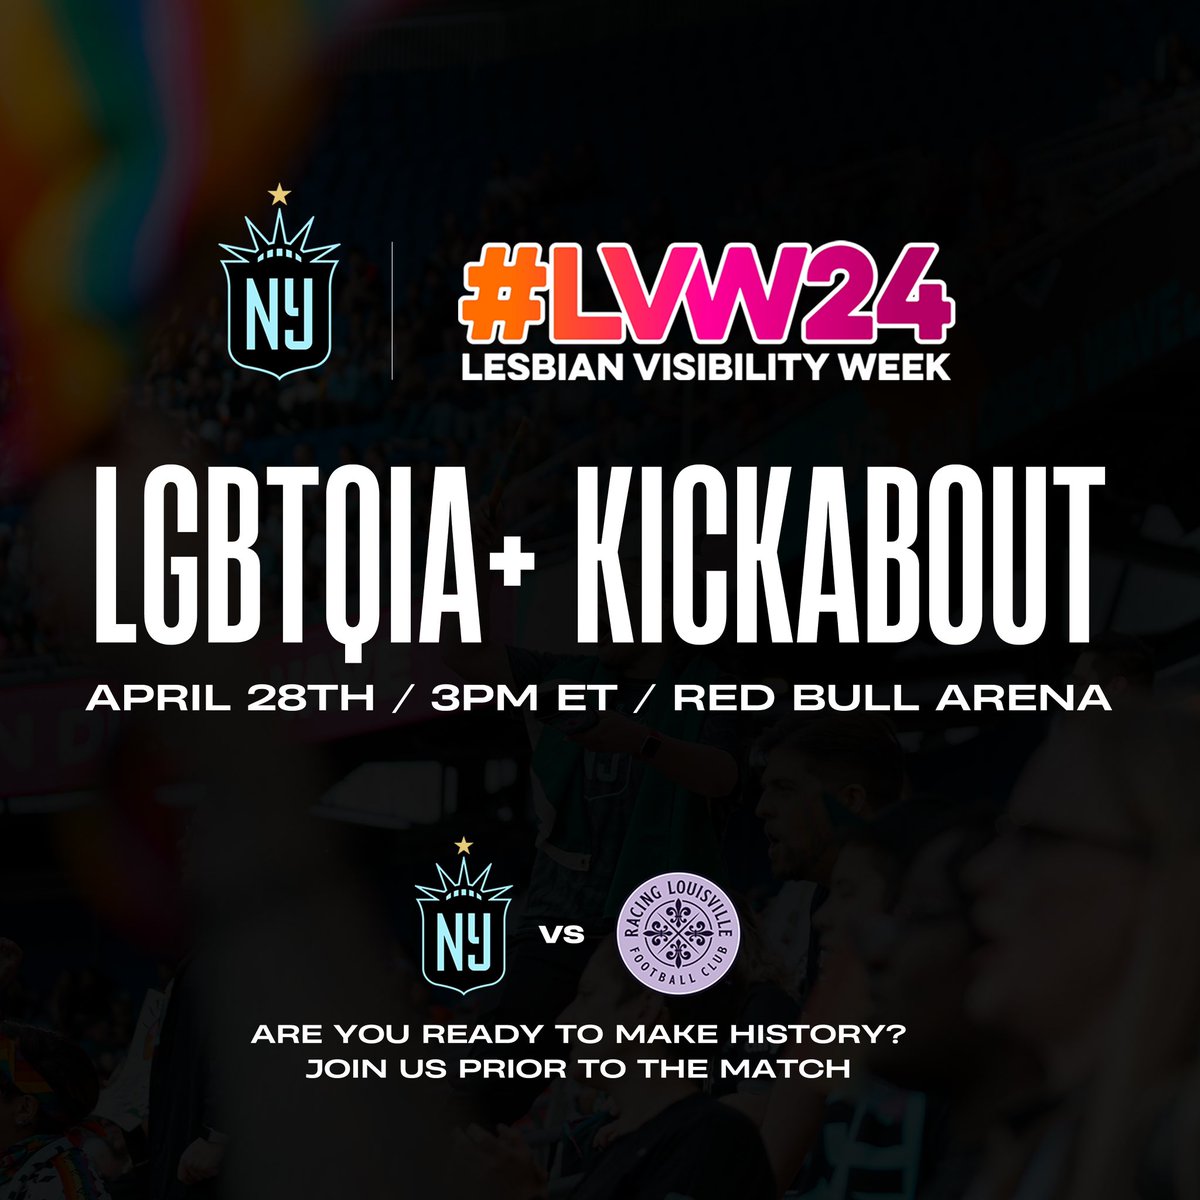 Where everyone belongs to play in the beautiful game ⚽️ In partnership with @LesbianVisWeek, join the fun and celebrate with us on inclusivity in the world of soccer. RSVP through the link in our bio. 🖤 #LVW24